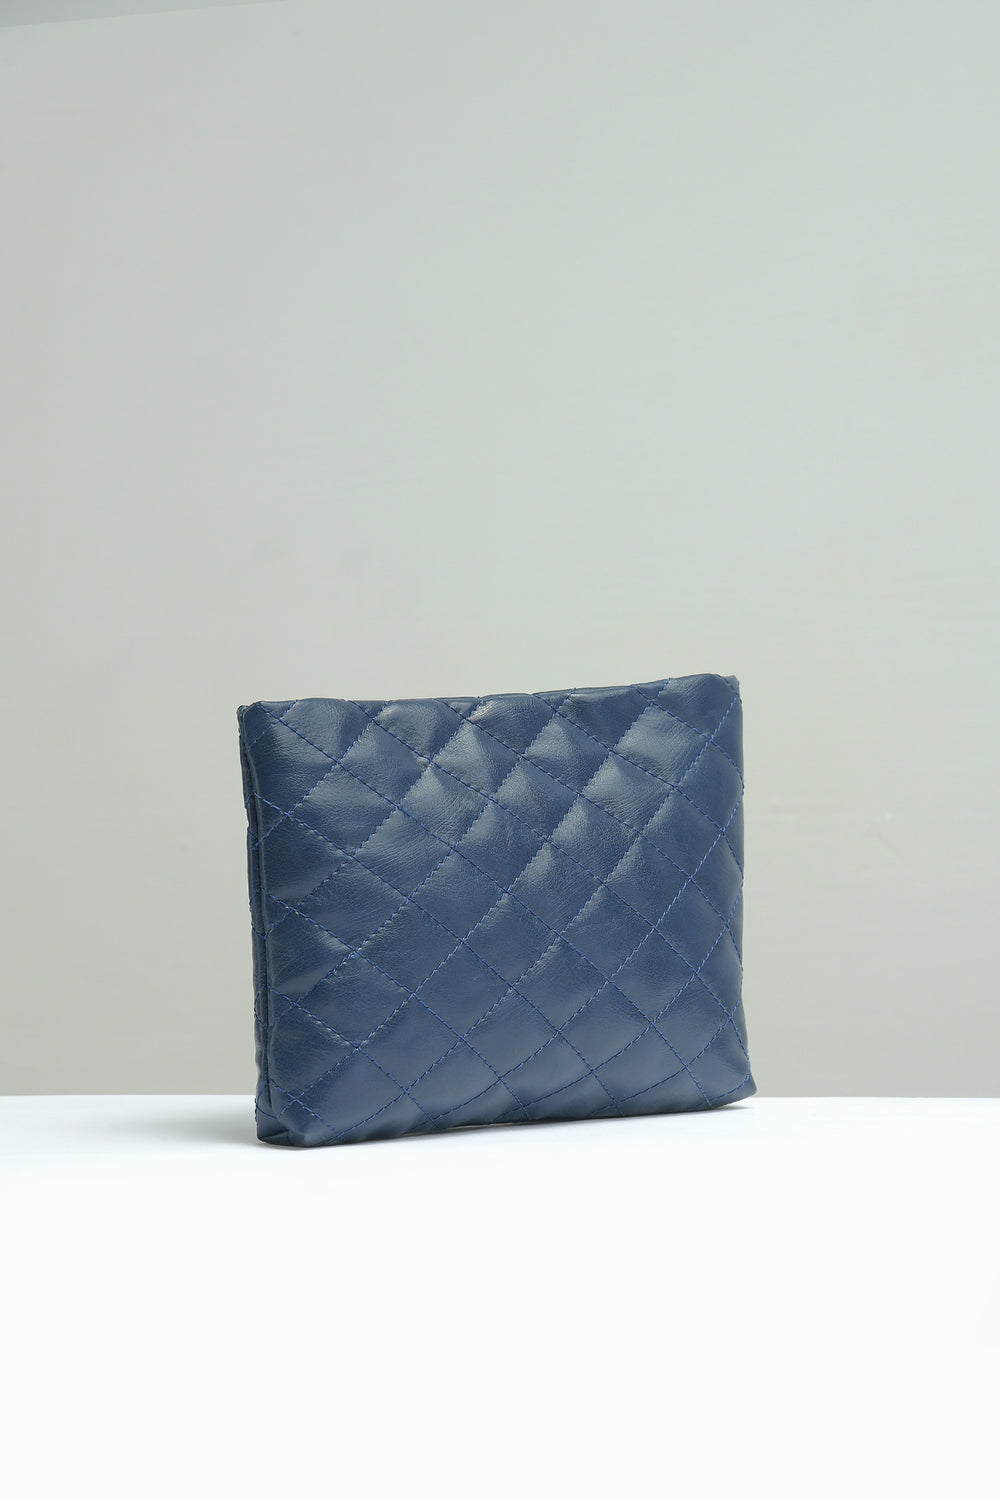 Buy Negative Apparel Small Quilted Embossed Pouch FD - Blue in Pakistan